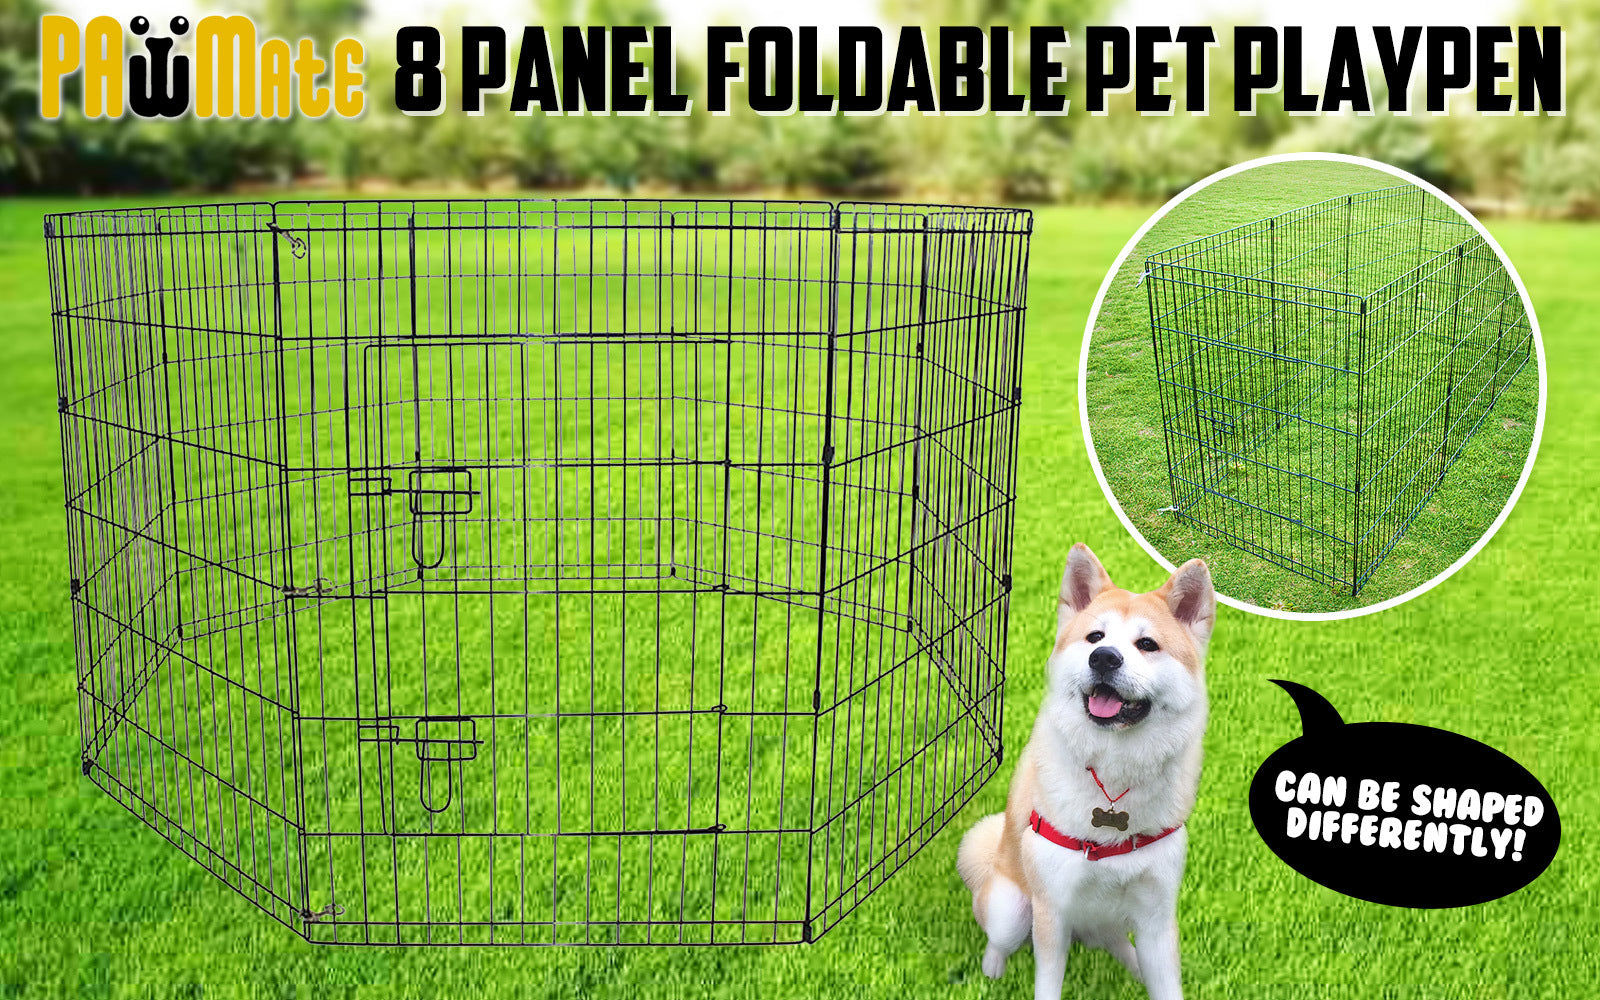 Pet Playpen 8 Panel 36in Foldable Dog Exercise Enclosure Fence Cage - image2